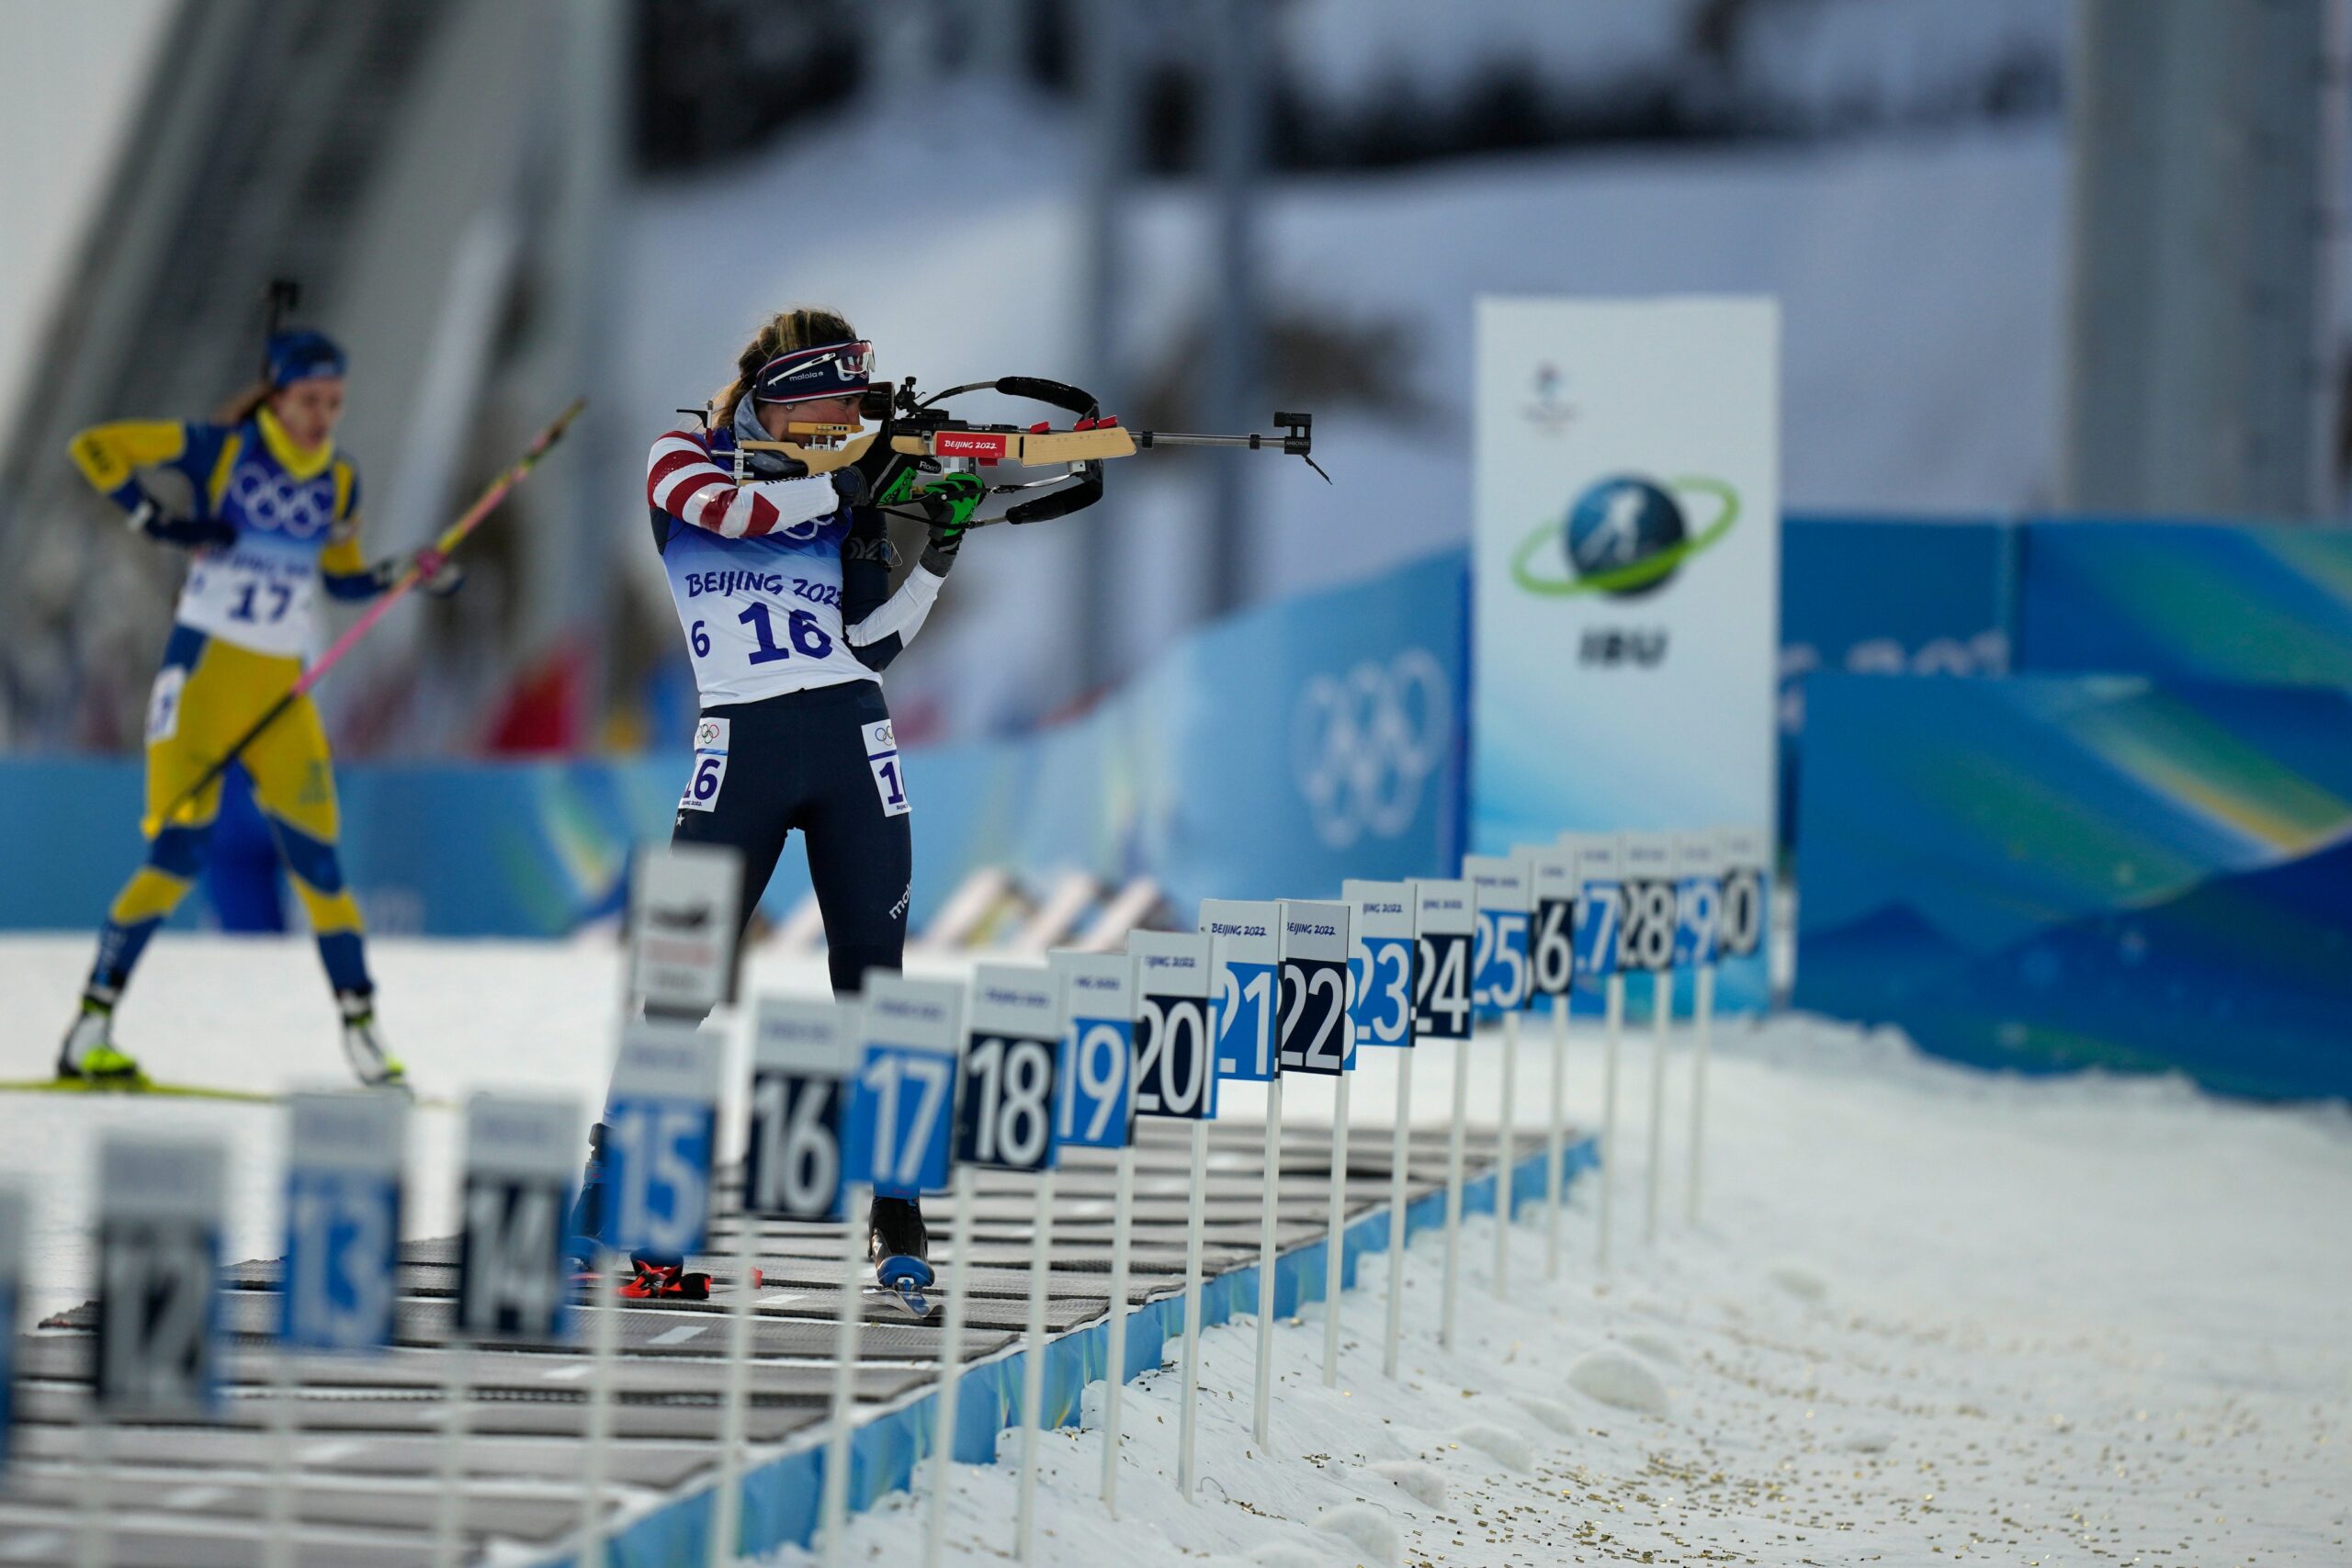 Deedra Irwin's finish at the Olympics was the best ever by and American.